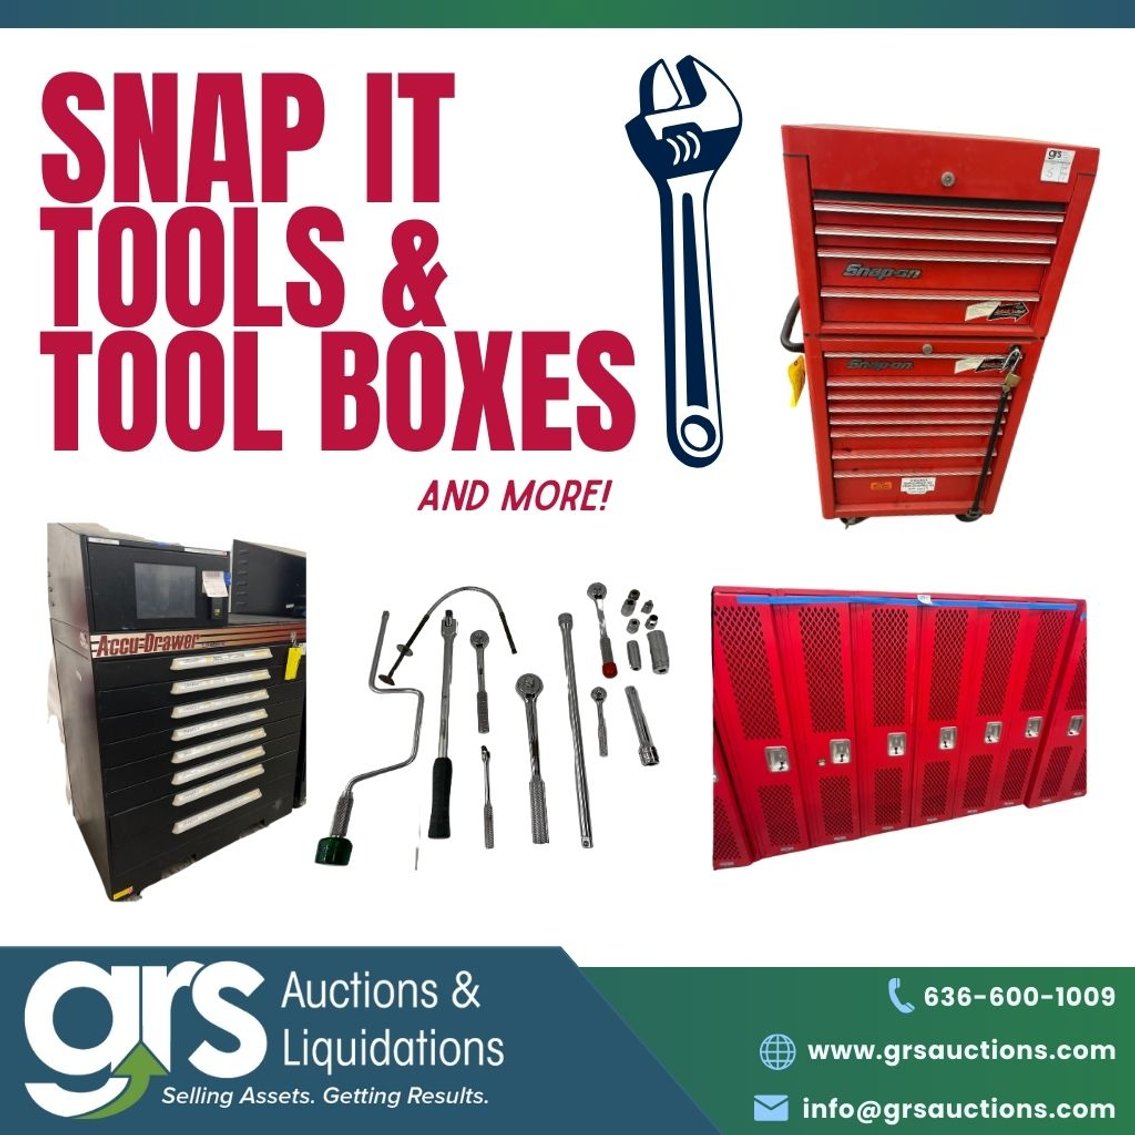 Snap It Tools, Tools Boxes....and more!